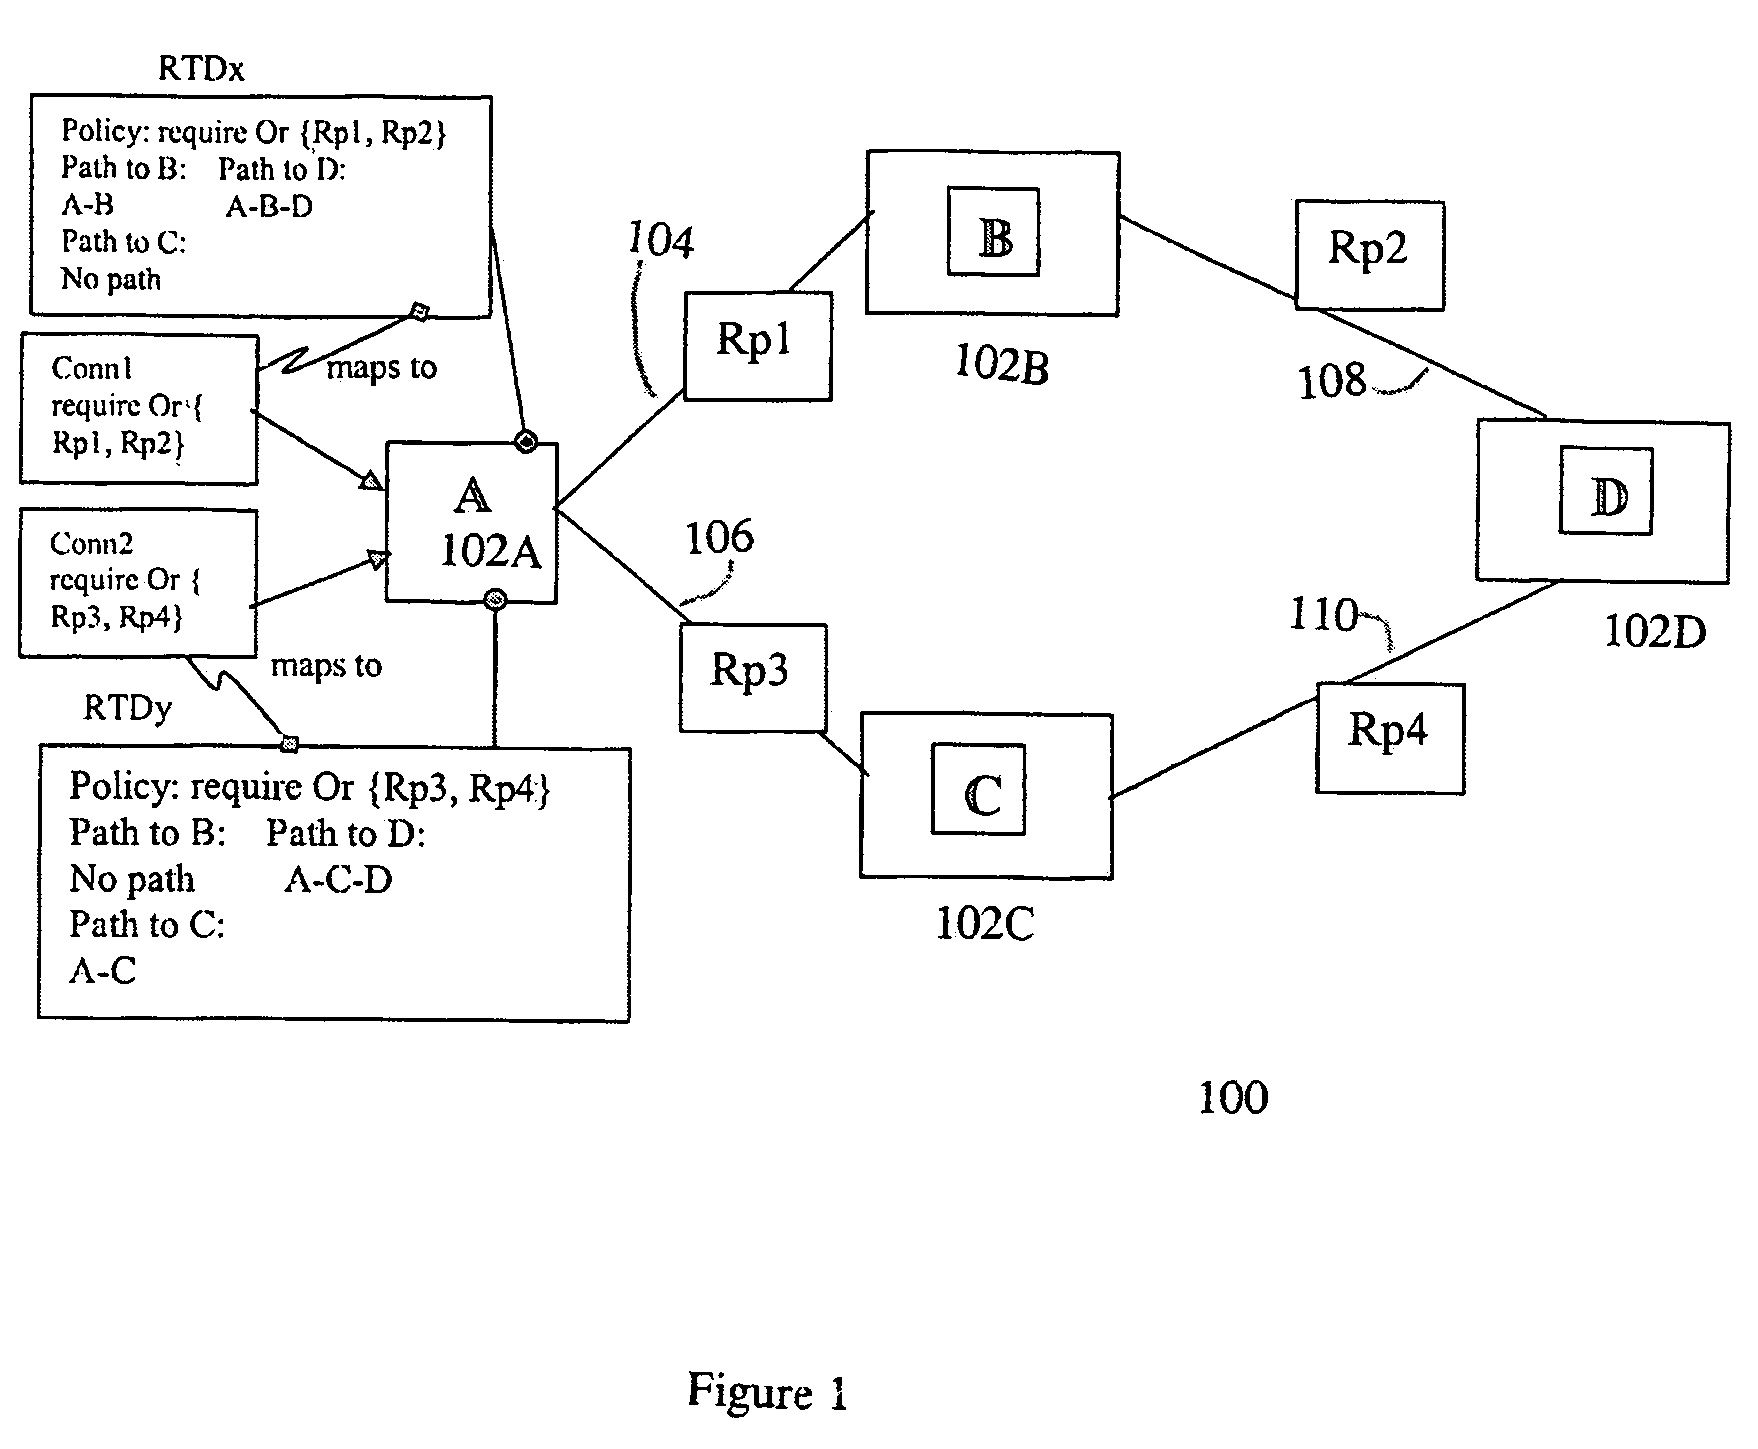 System and method for identifying pre-computed paths in a policy-based routing network